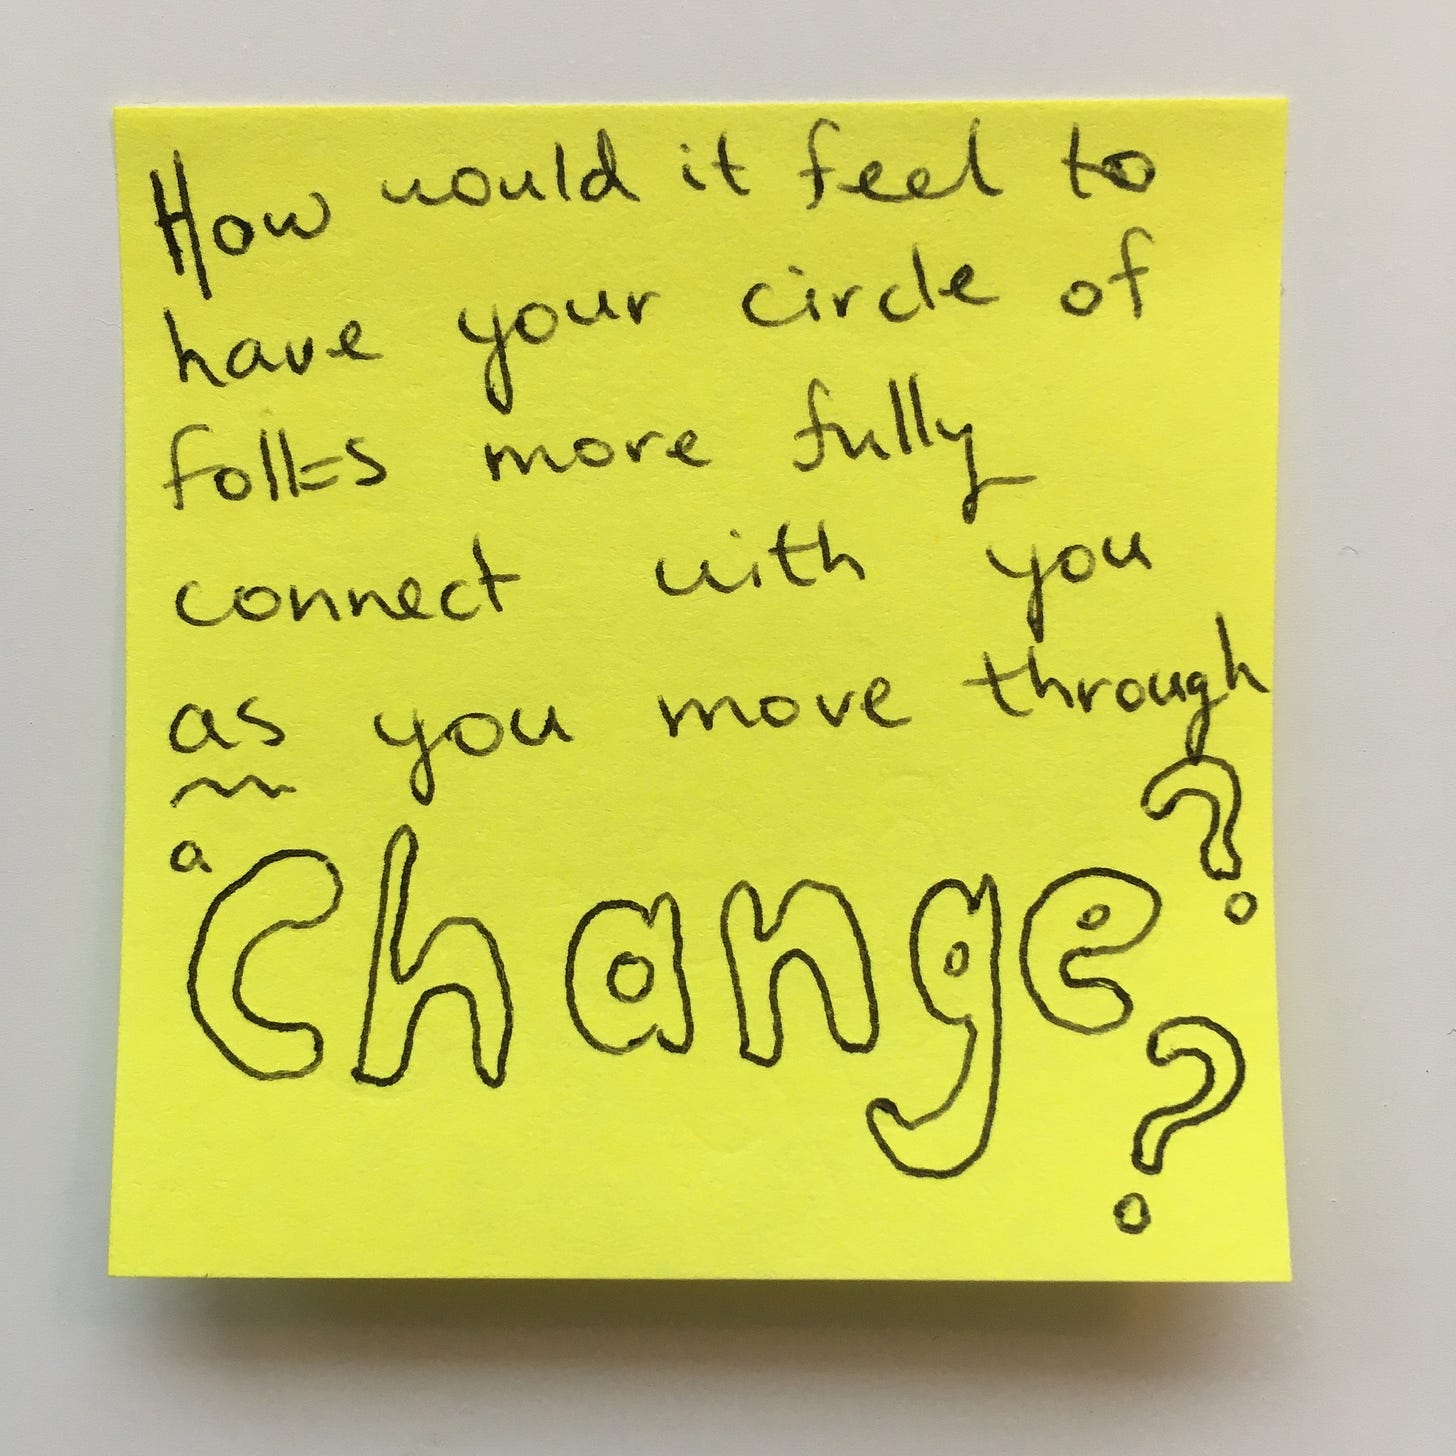 yellow square sticky note stuck to white background that has handwritten on it: How would it feel to have your circle of folks more fully connect with you as [underlined] you move through a change [in bubble letters]??